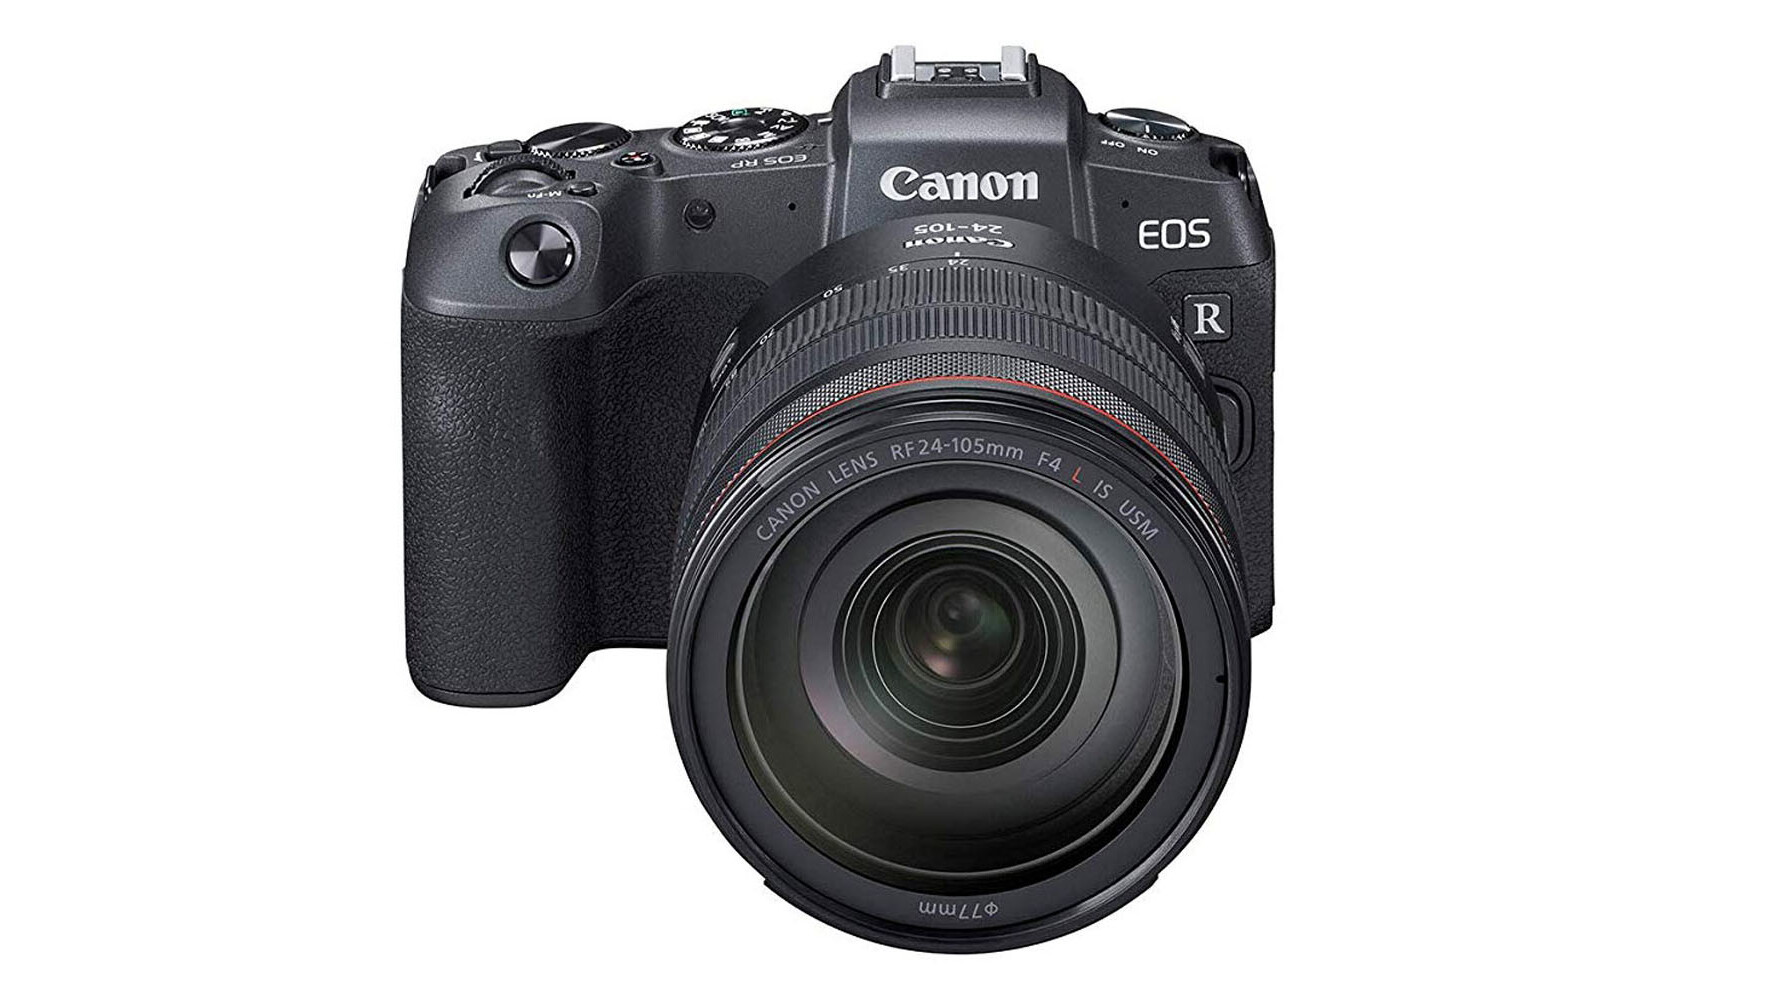 Canon shows it’s serious about full-frame mirrorless with the affordable EOS RP